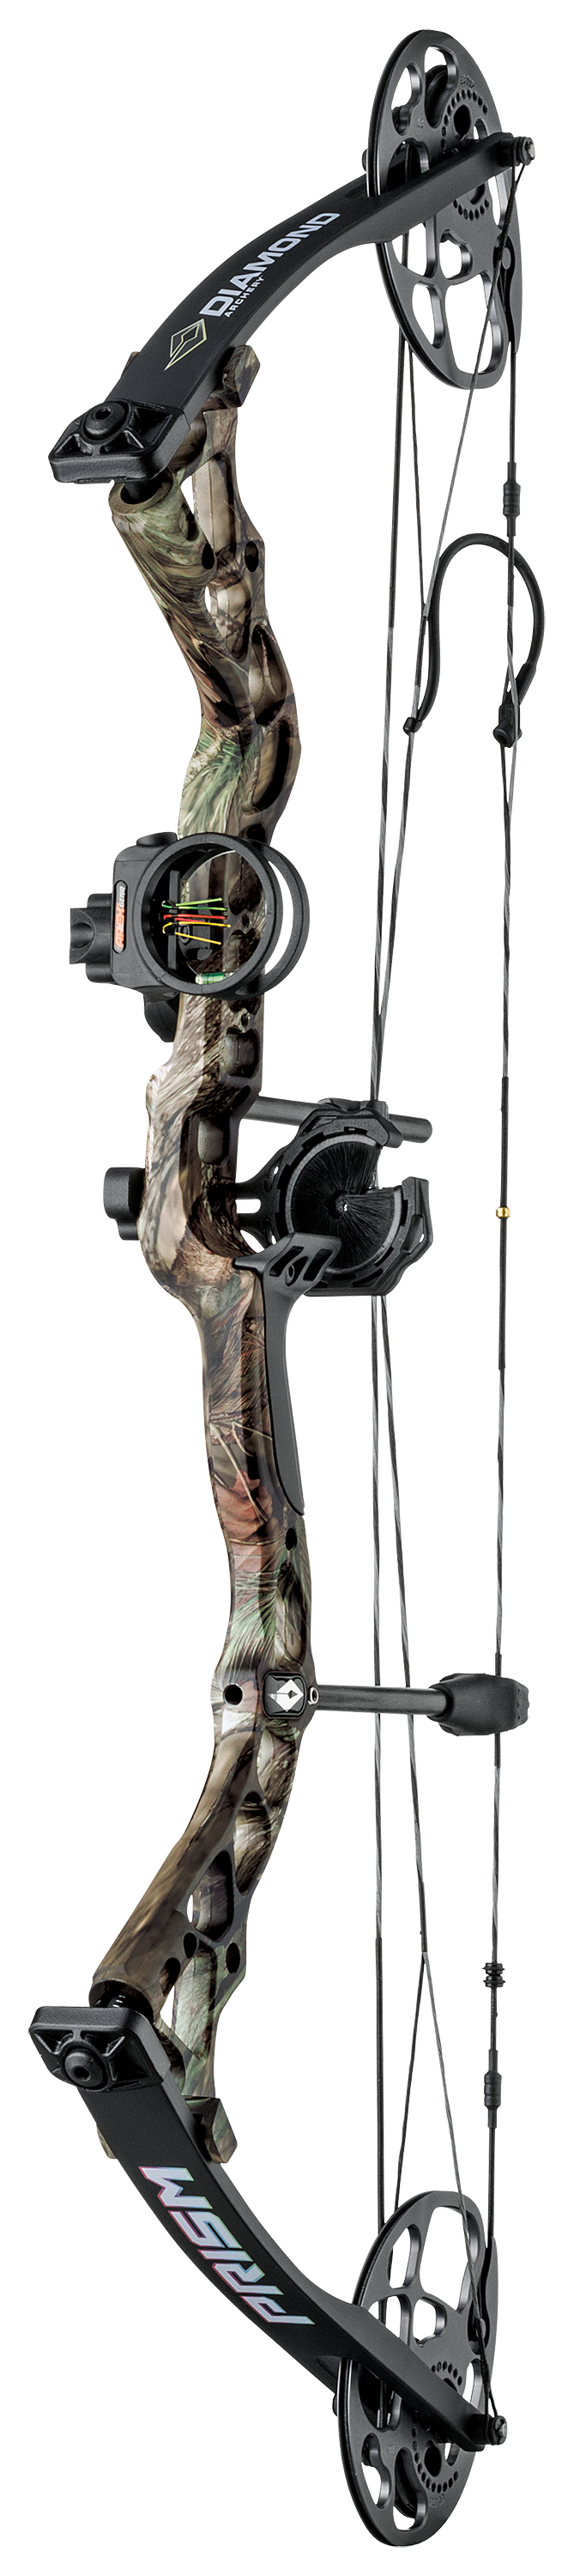 Diamond by Bowtech Prism Compound Bow Package - Right Hand - Mossy Oak Break-Up Country